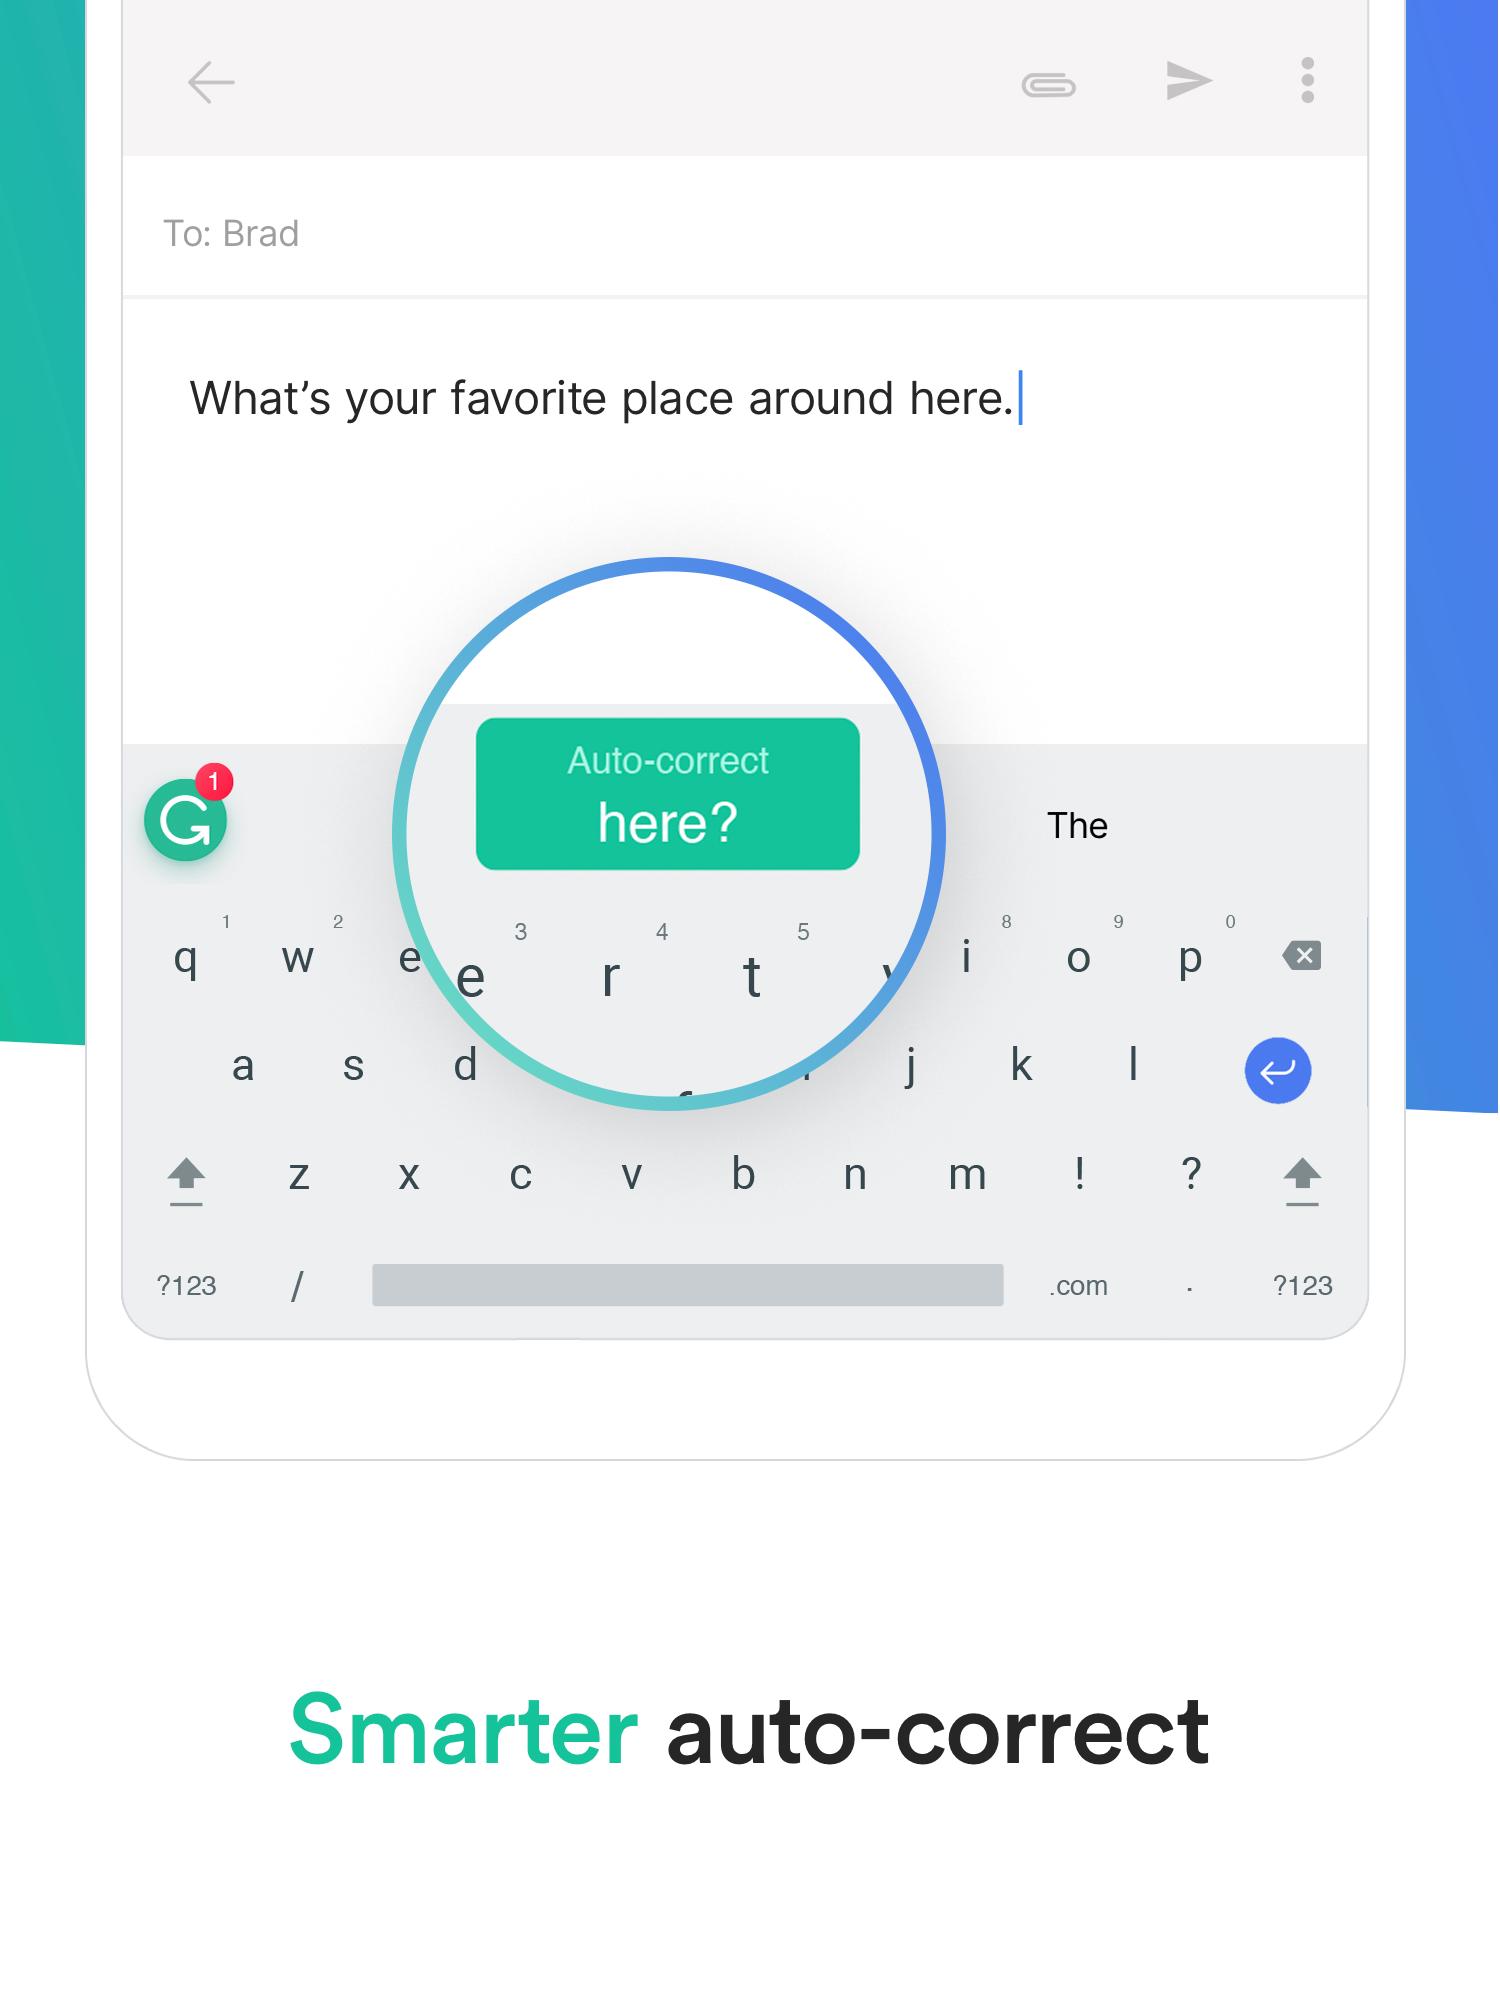 Grammarly Keyboard — Type with confidence 1.4.0.7 Screenshot 9